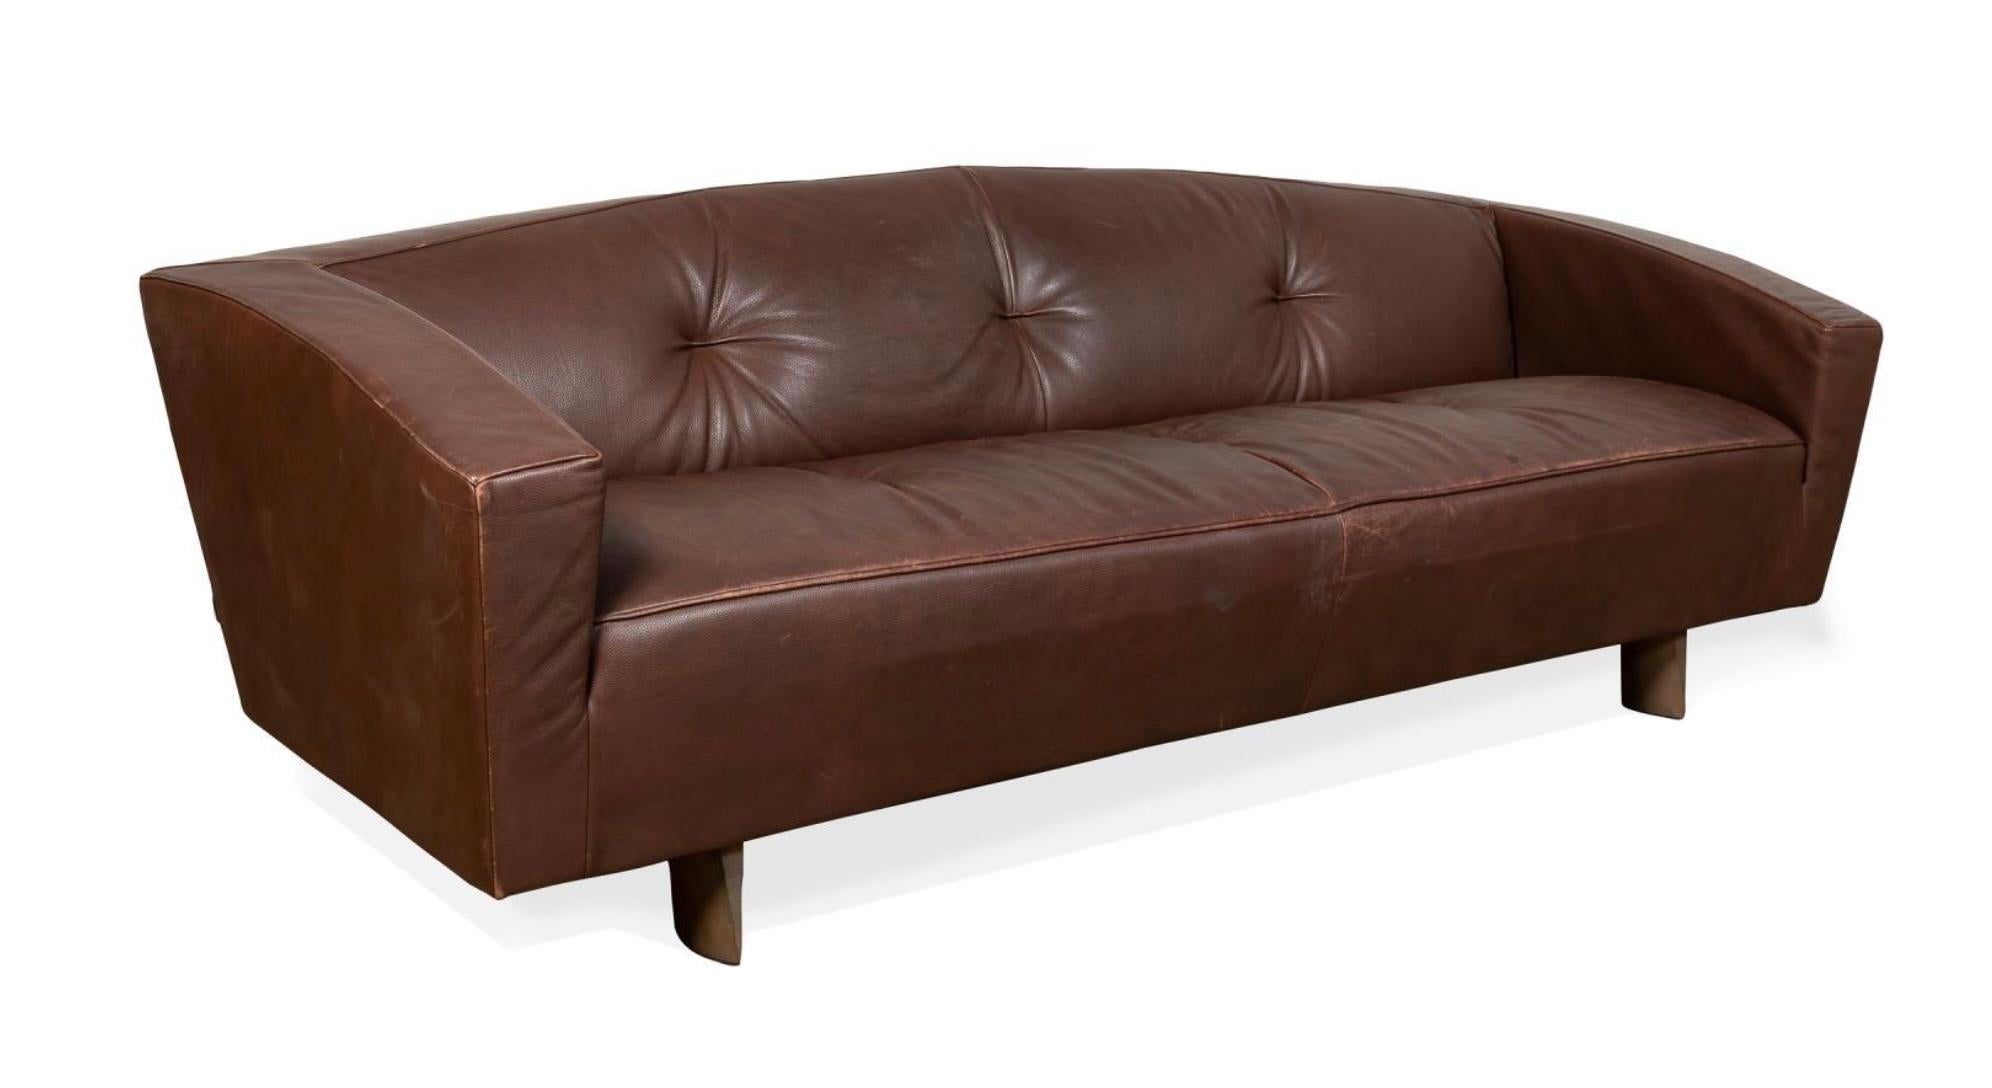 Scandinavian Modern Scandinavian Vintage Modern Low Brown leather 3 seat sofa by Montis in Holland For Sale